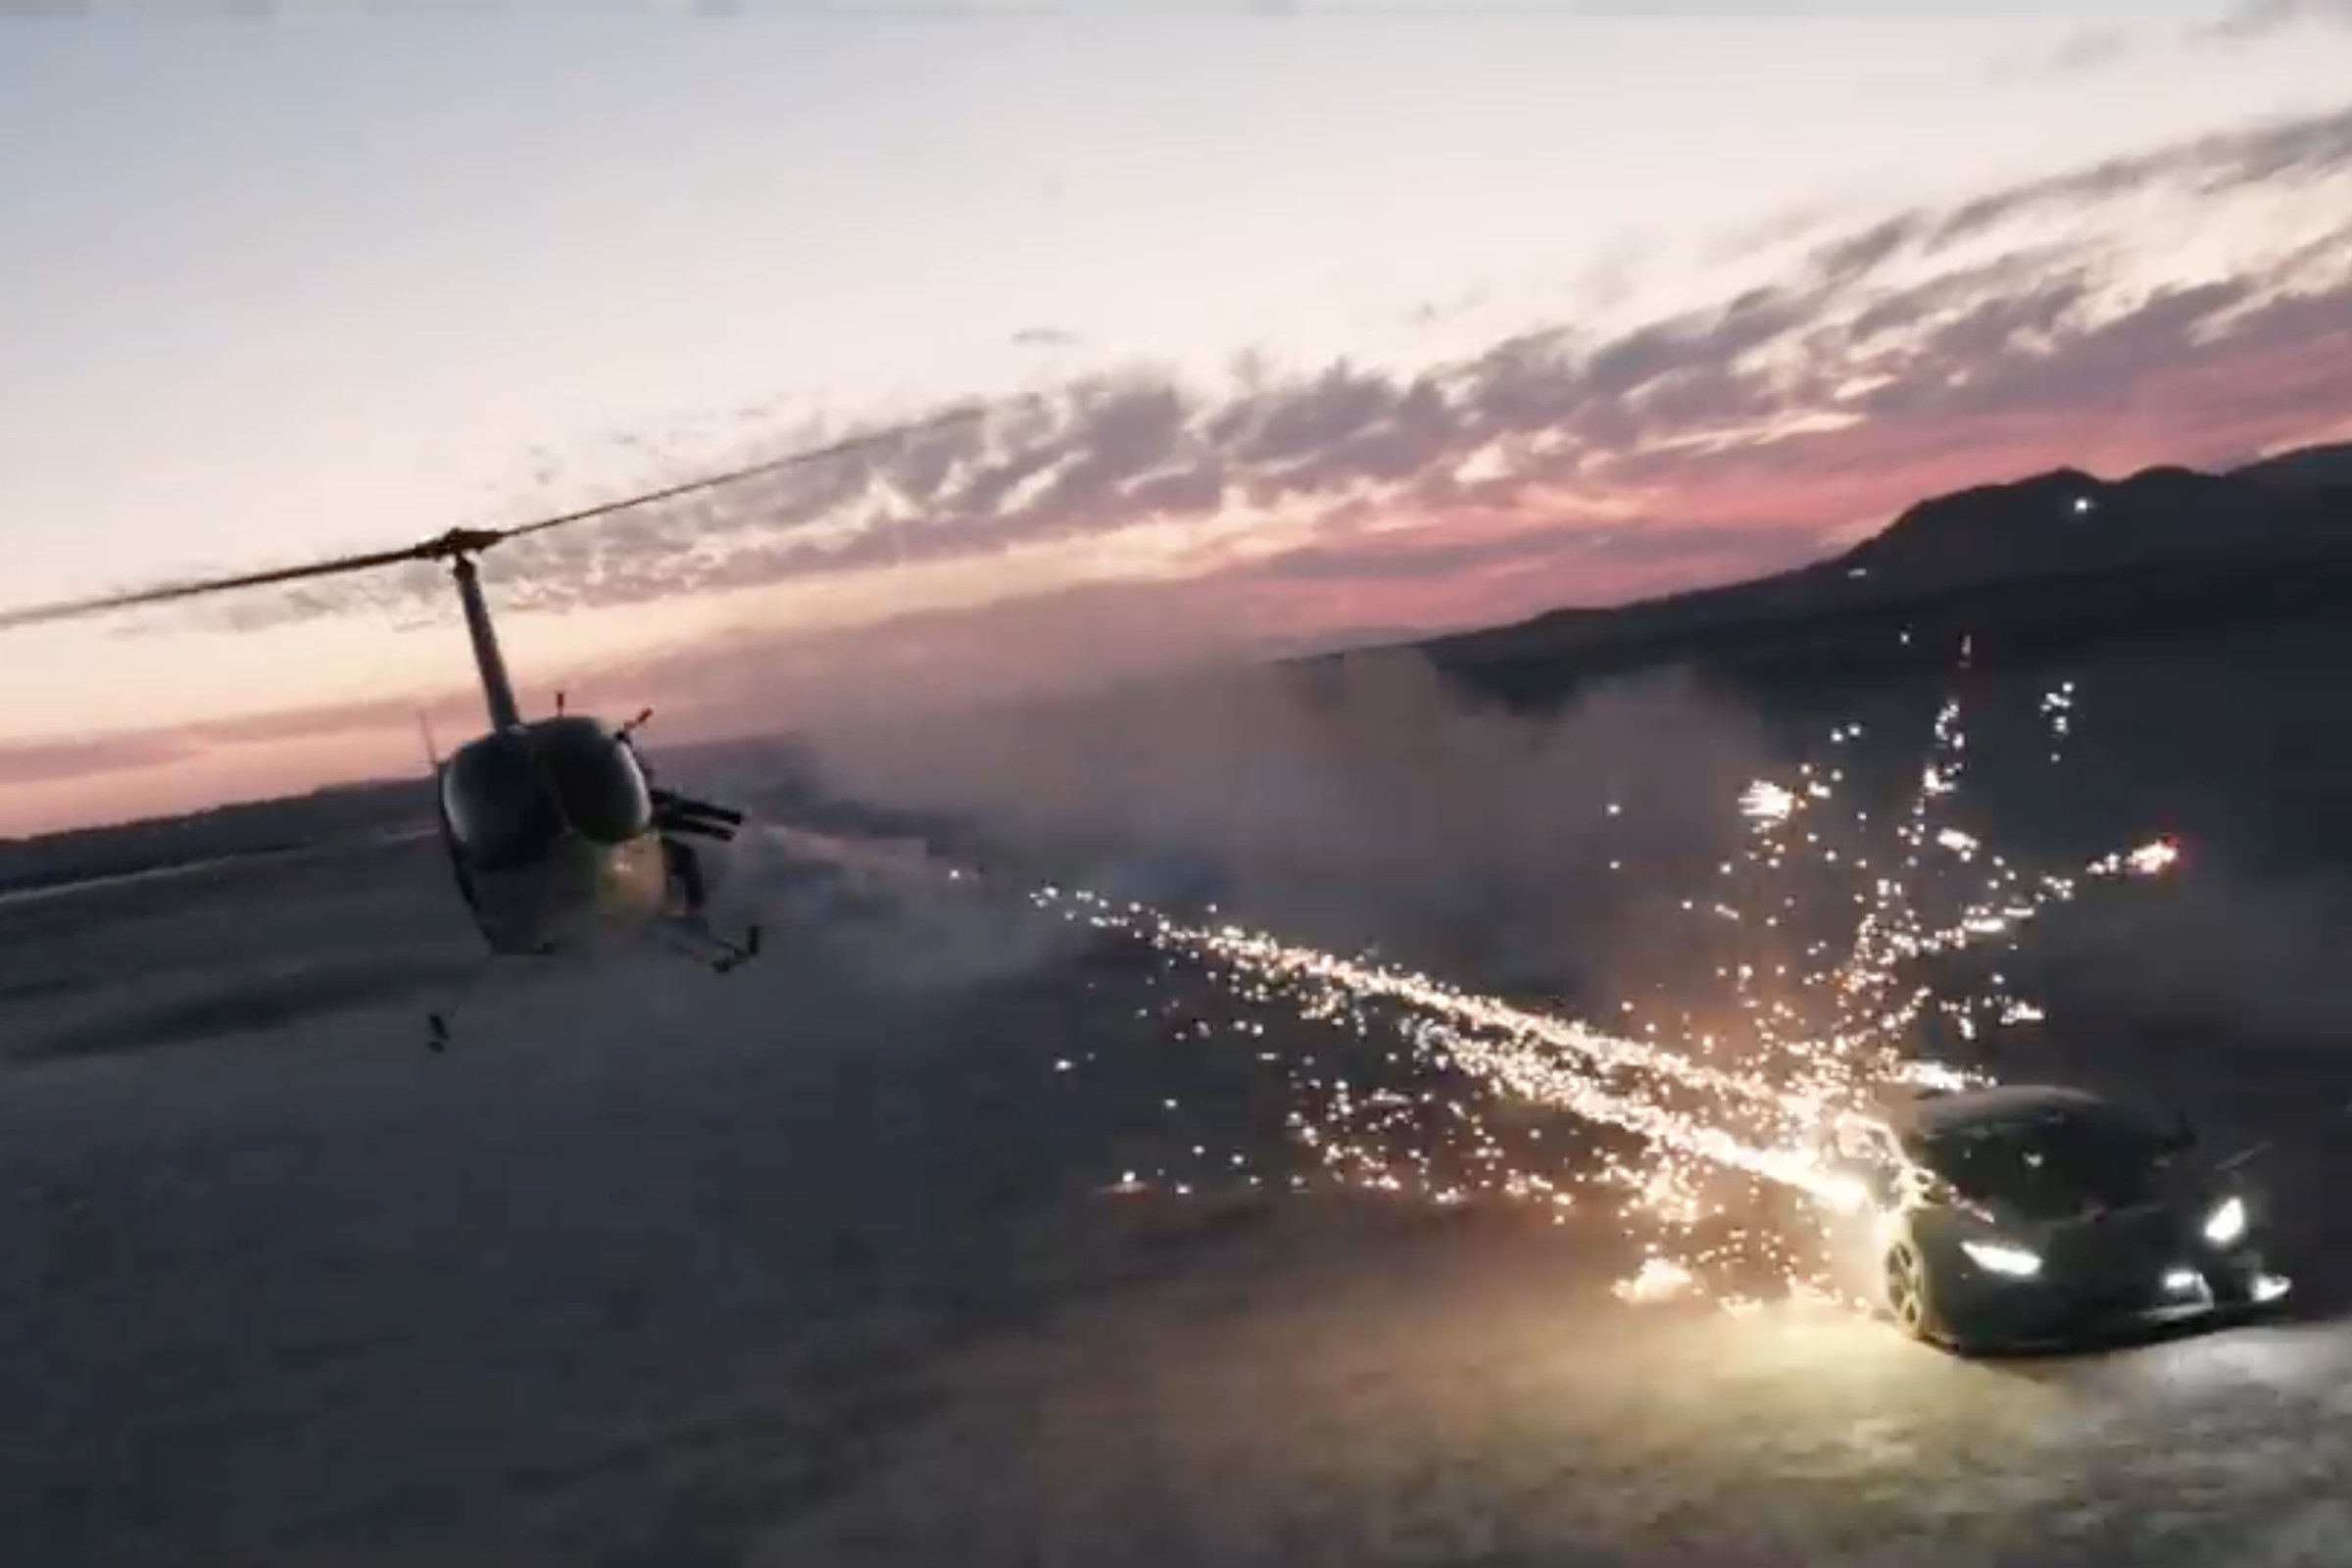 A screenshot from Alex Choi’s video showing a helicopter shooting fireworks at a Lamborghini.